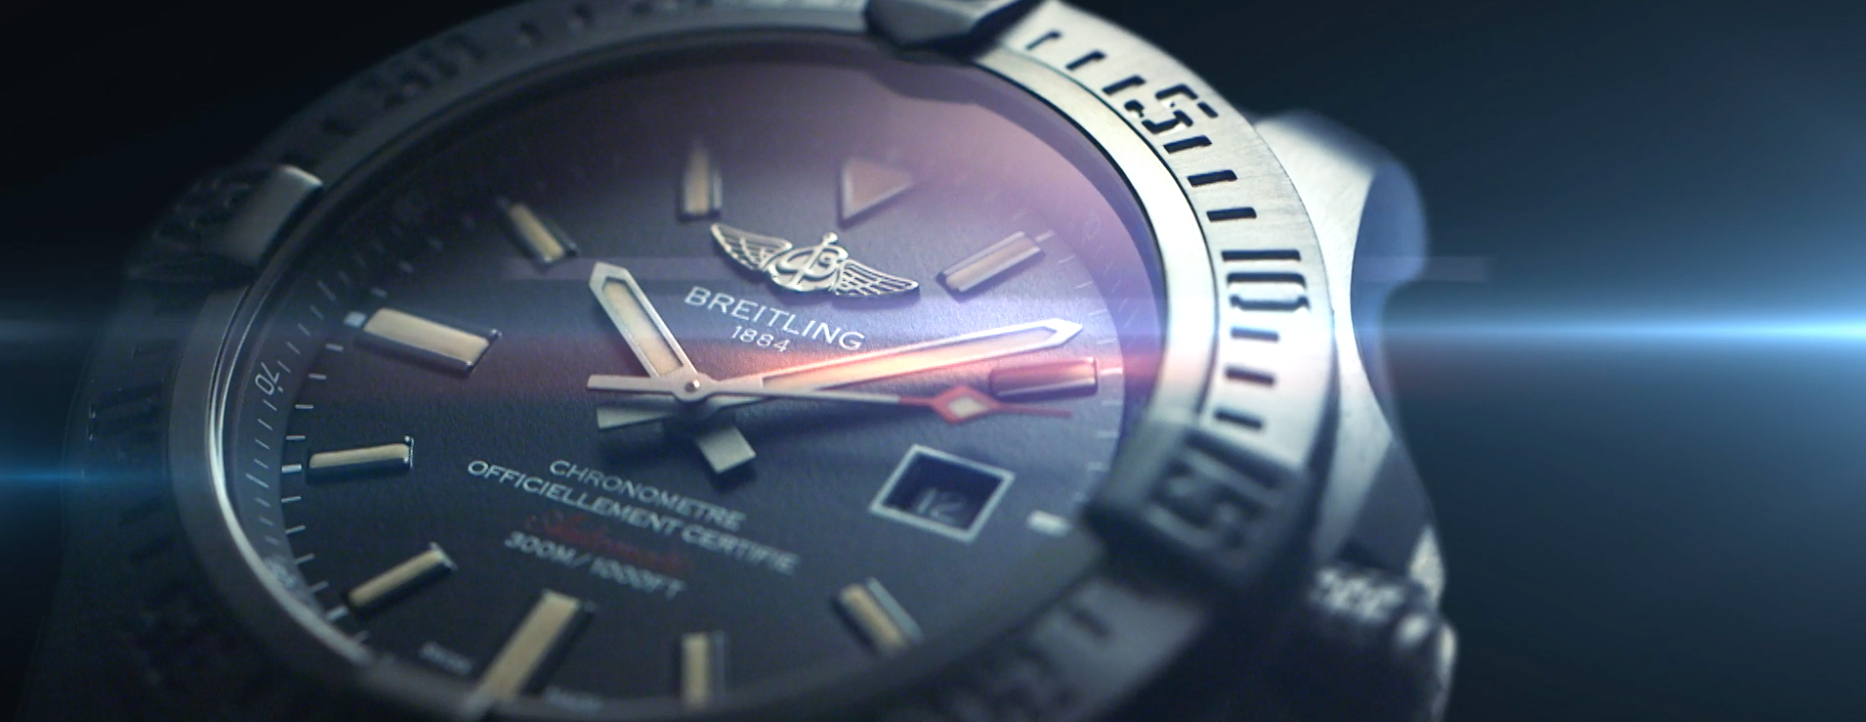 breitling Time Starr/Kimbrough